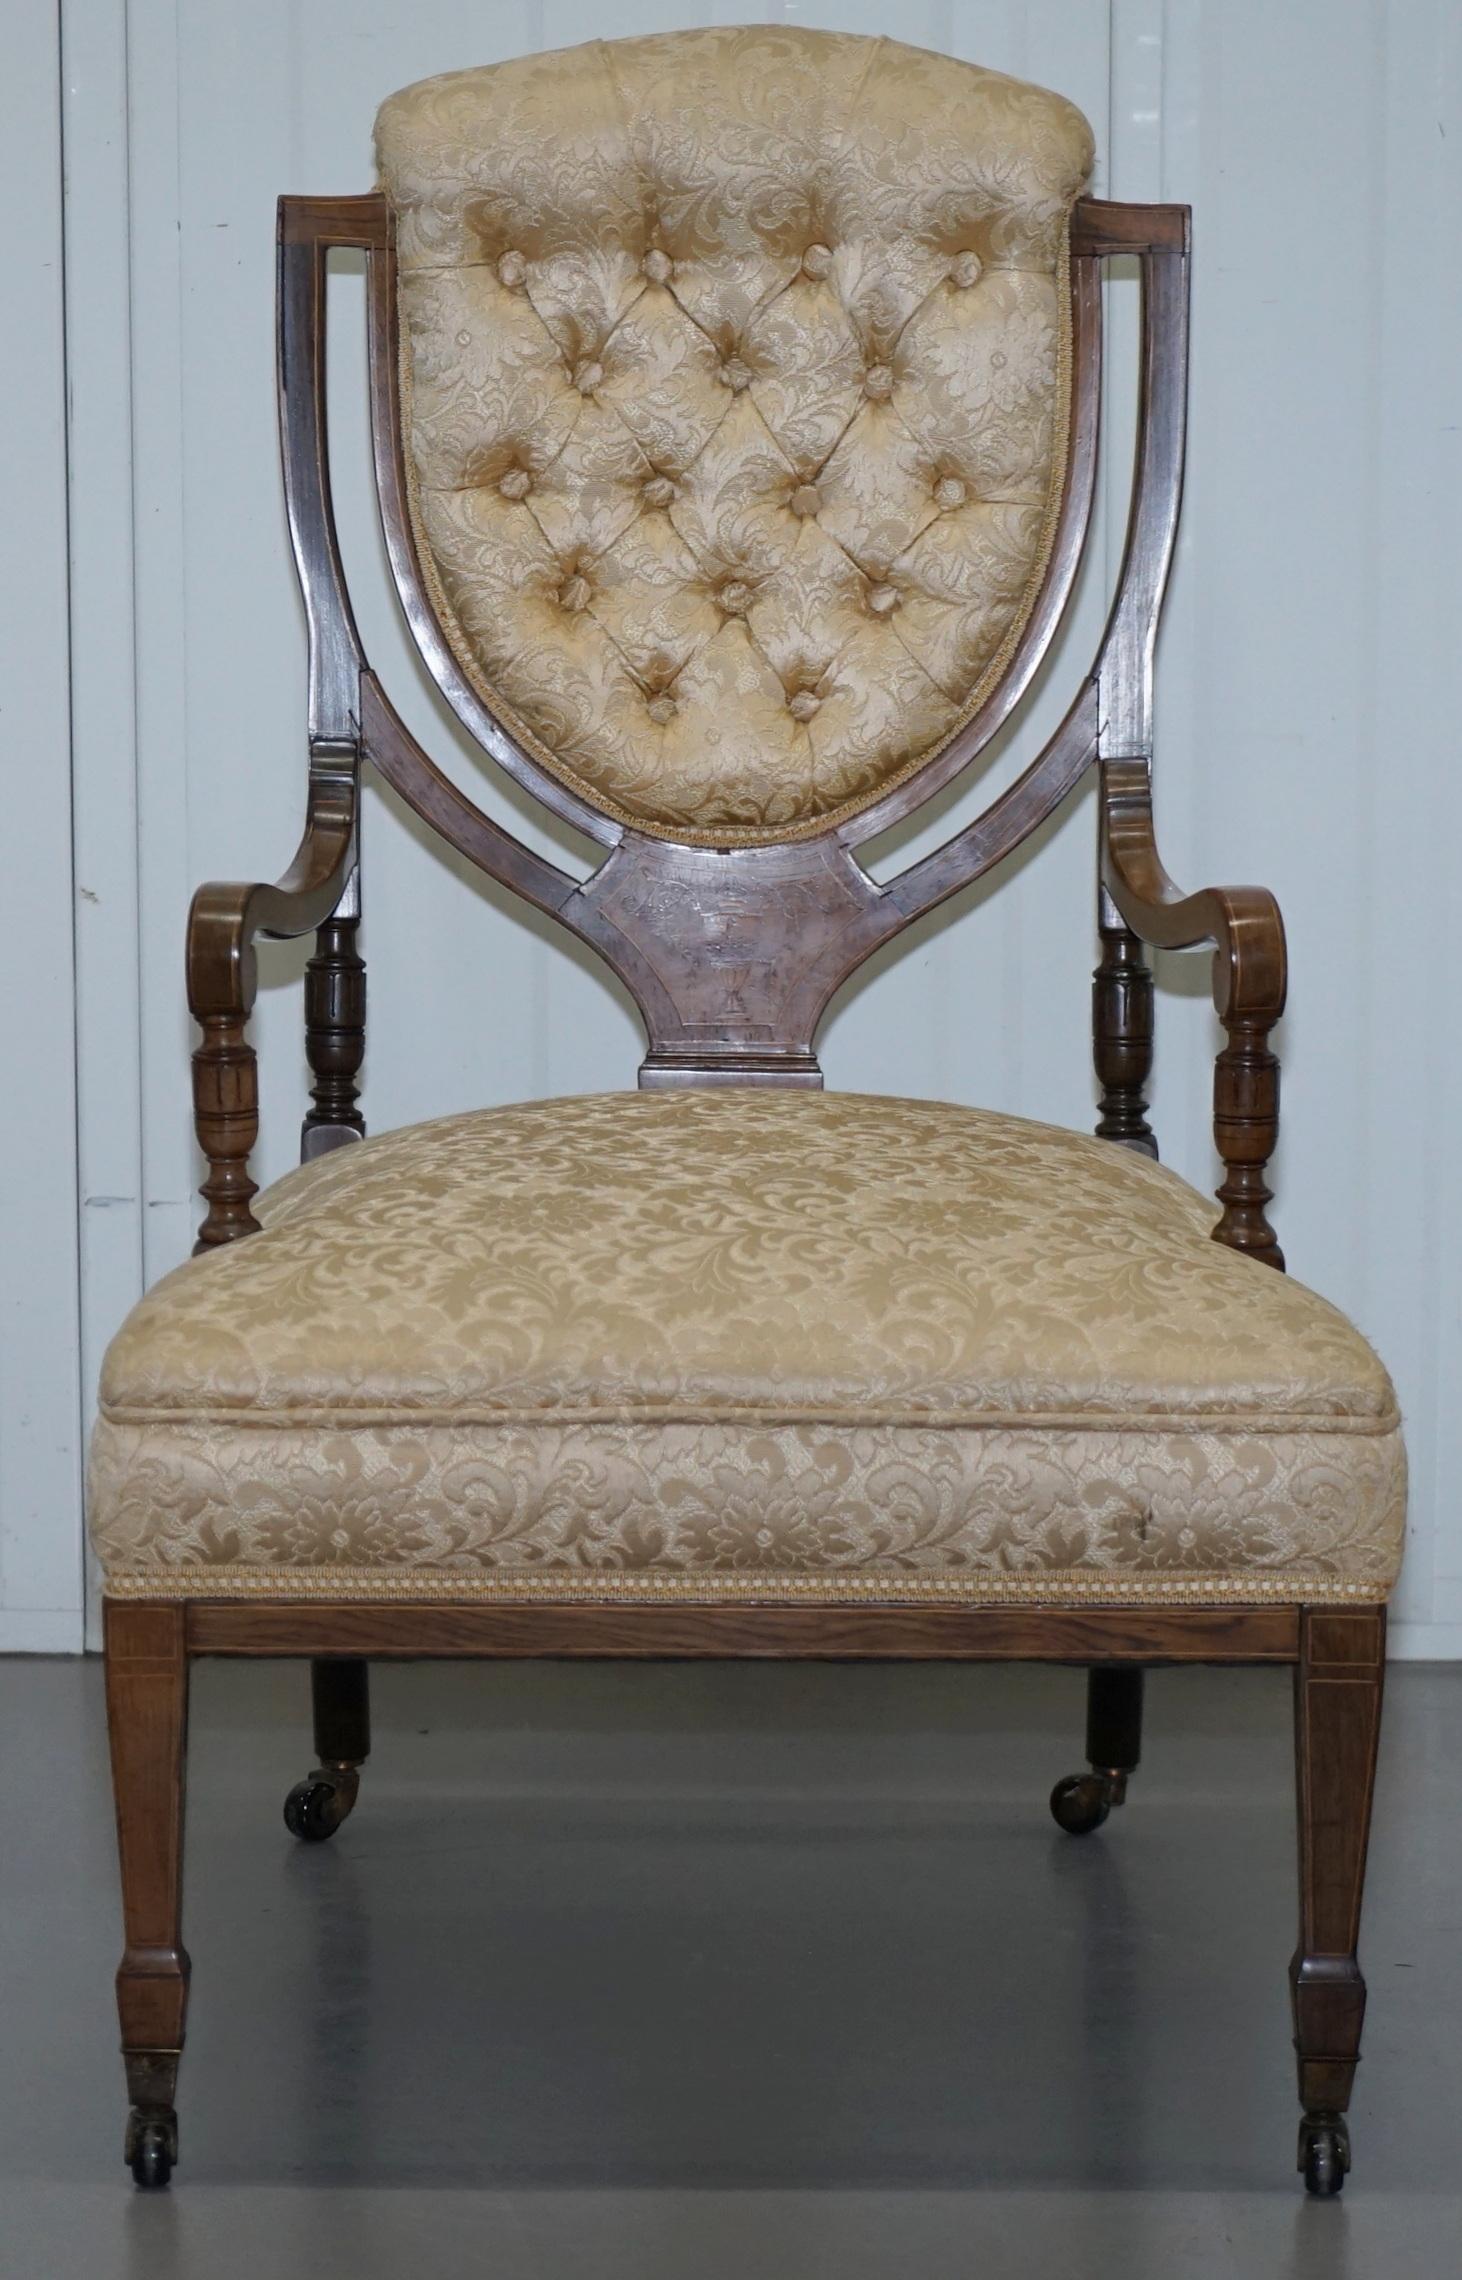 We are delighted to offer for sale this stunning solid Rosewood Sheraton revival style Chesterfield buttoned armchair dating from 1900

This item is part of a suite, I have one single chair and then another matching pair of the standard chairs,